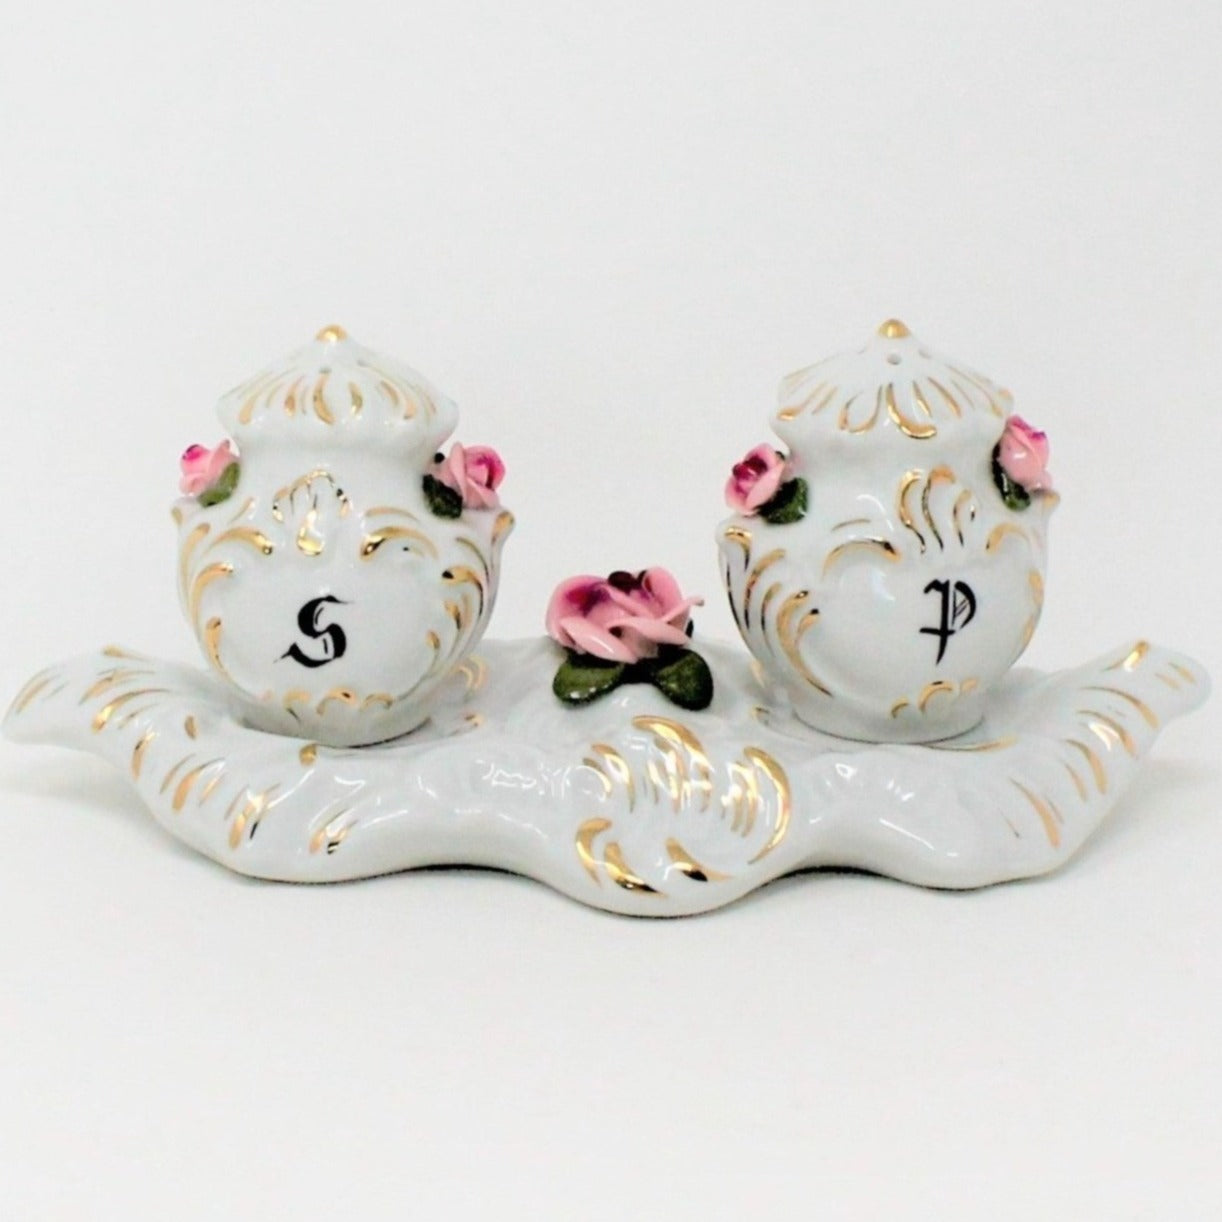 Salt and Pepper Shakers with Tray, Dresden Style, Hand Applied Pink Roses, Vintage